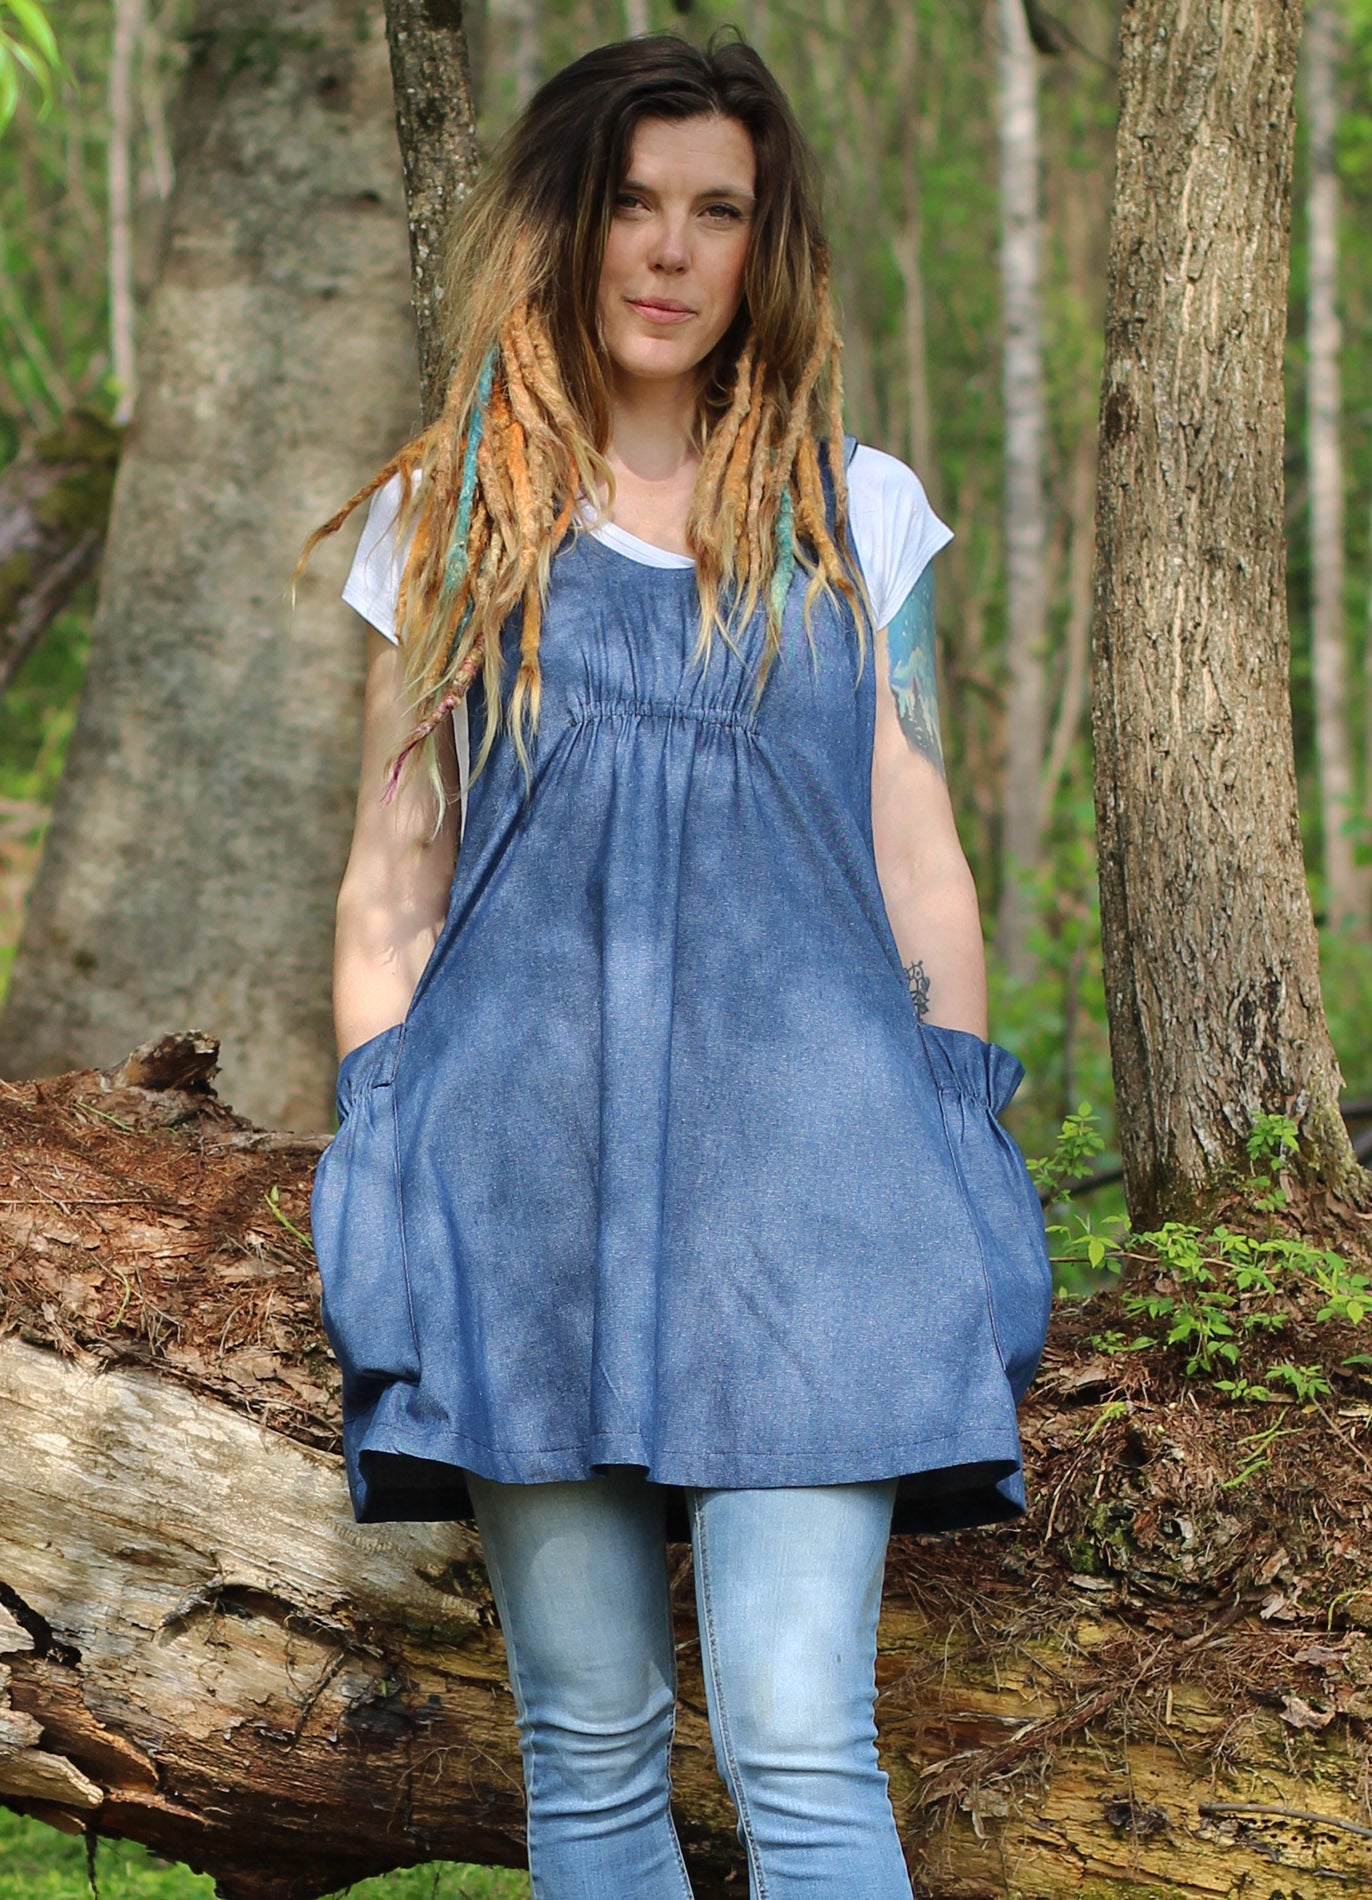 XS-5X Smock #1 in Denim - Front View standing next to a fallen tree.